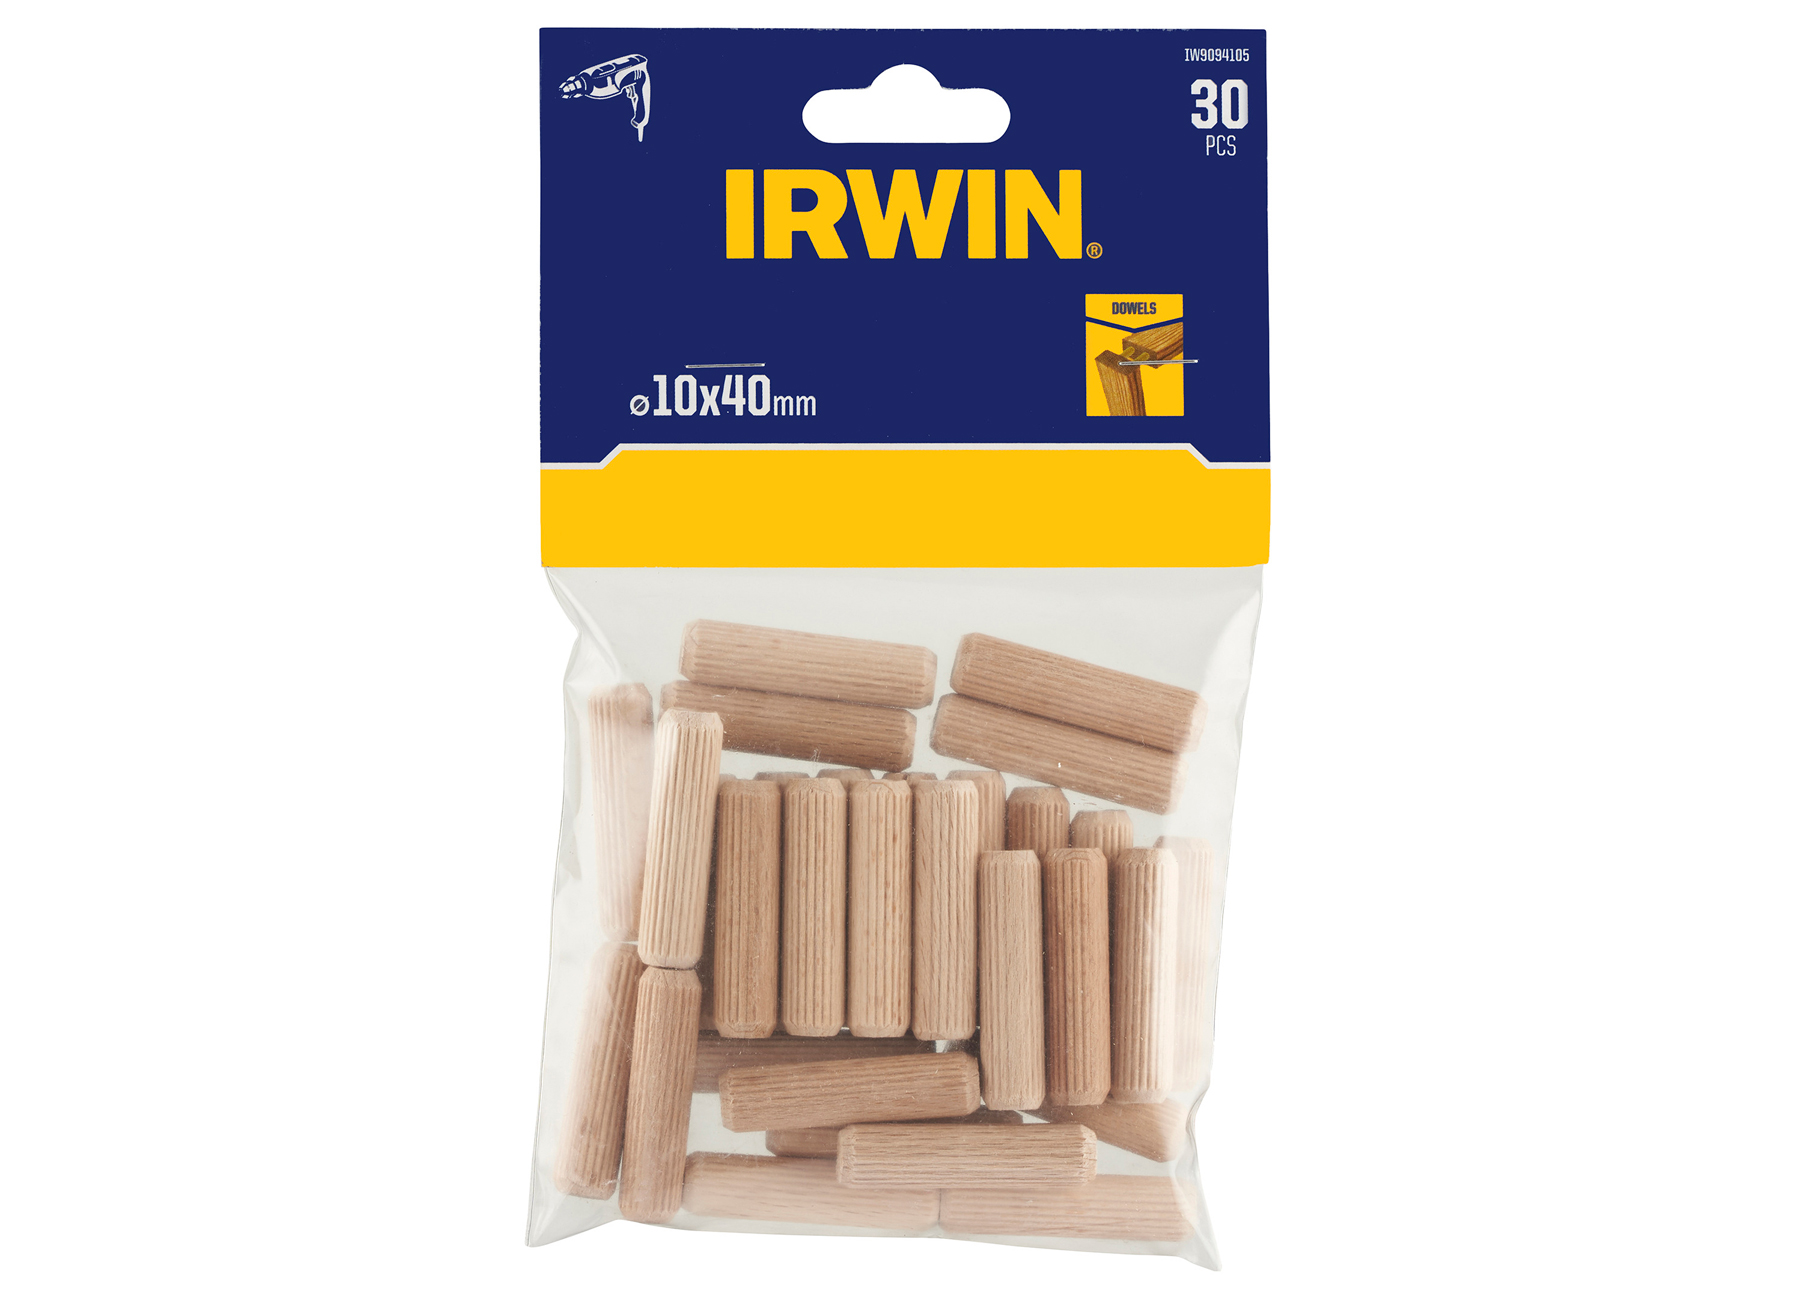 IRWIN TOURILLONS Ø10MM 40MM 30 PIECES